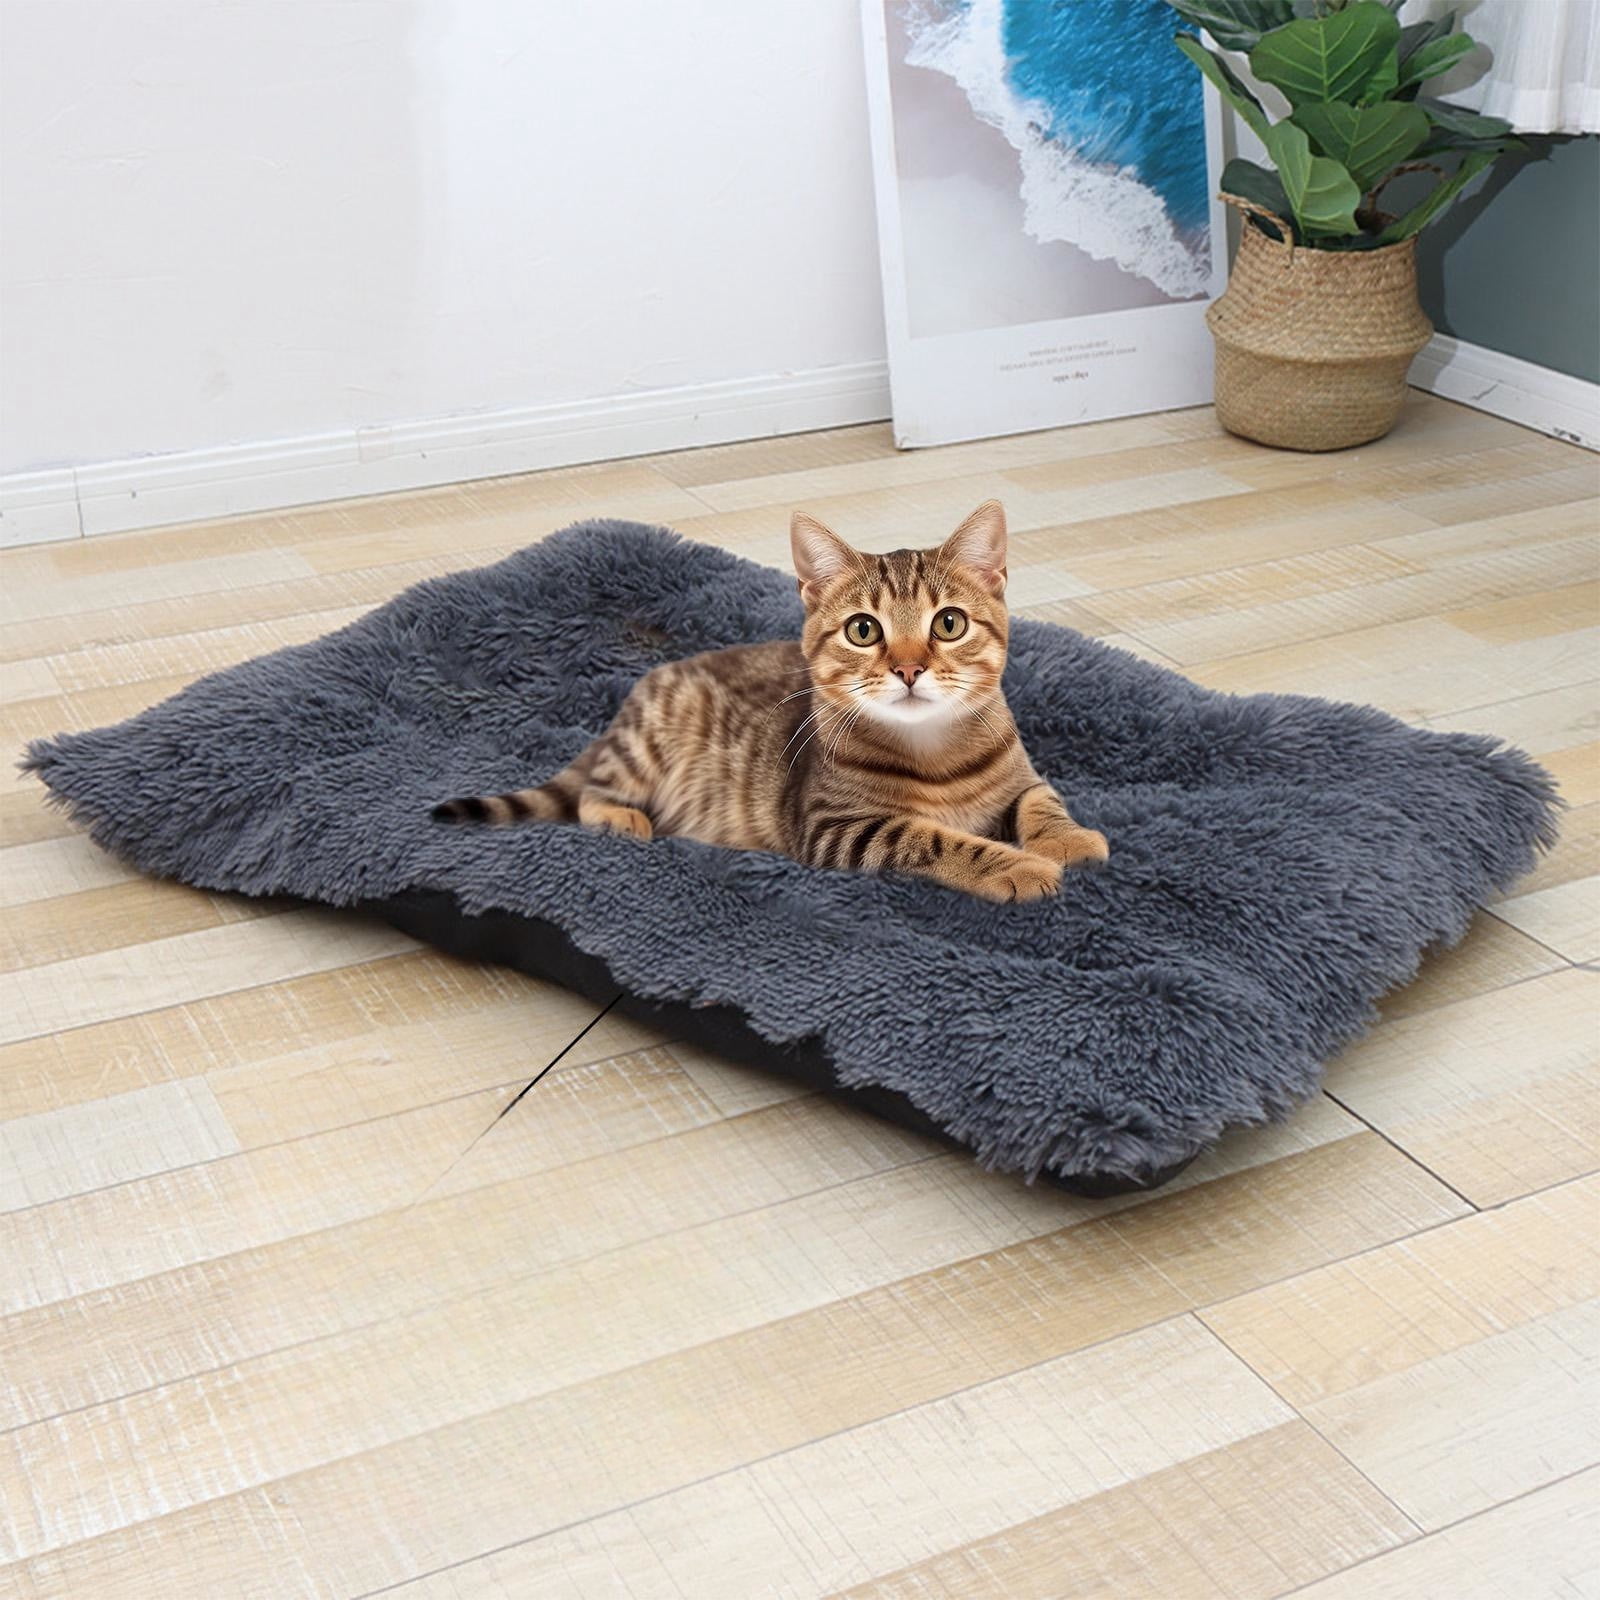 SUWHWEA Pet Deals Winter Warm Plush Pet Kennel Removable And Washable Thickened Non-slip Stainresistant Dog Mat Washable Dog Kennel Soft Cats Kennel Suitable 11 To 33 Pounds Spring Savings